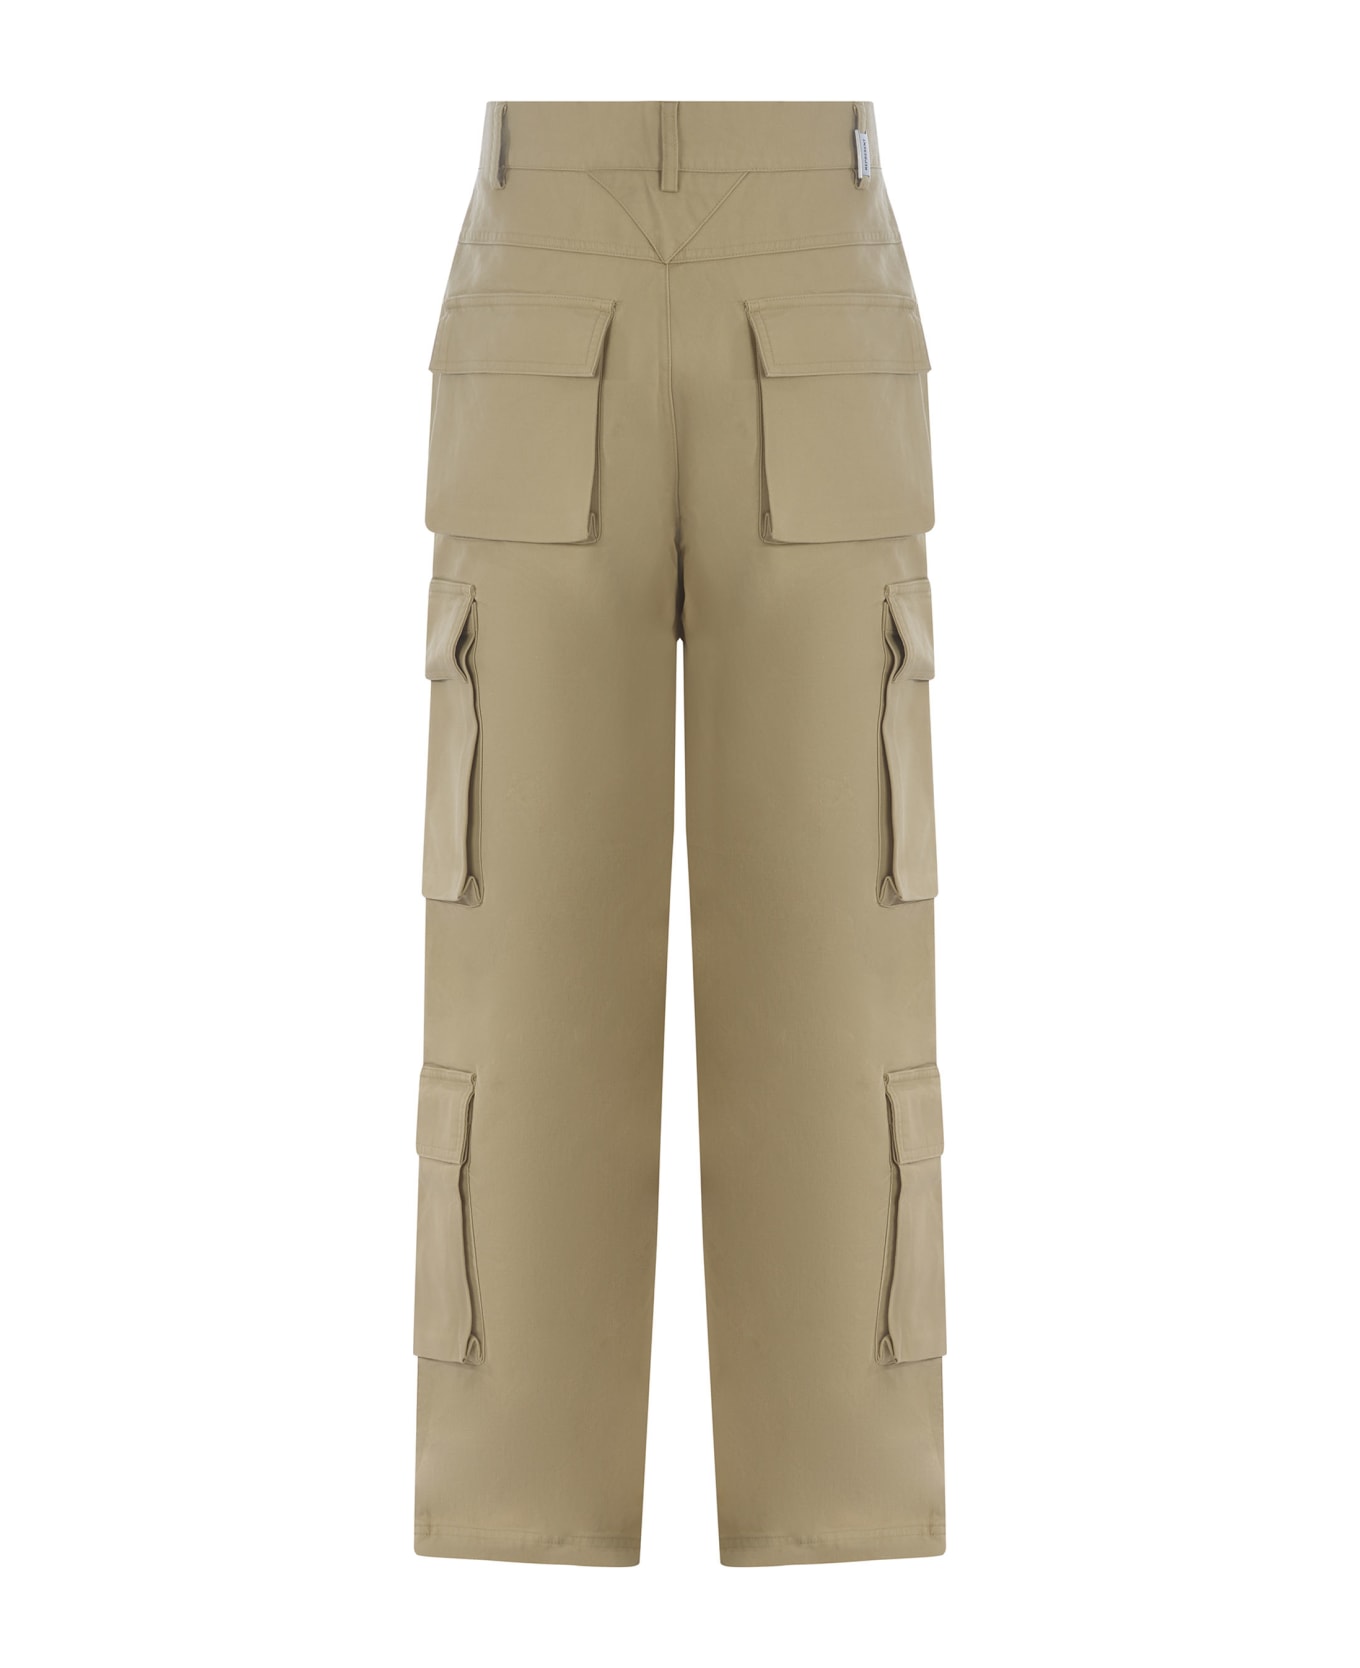 REPRESENT Trousers Represent Made Of Cotton - Beige